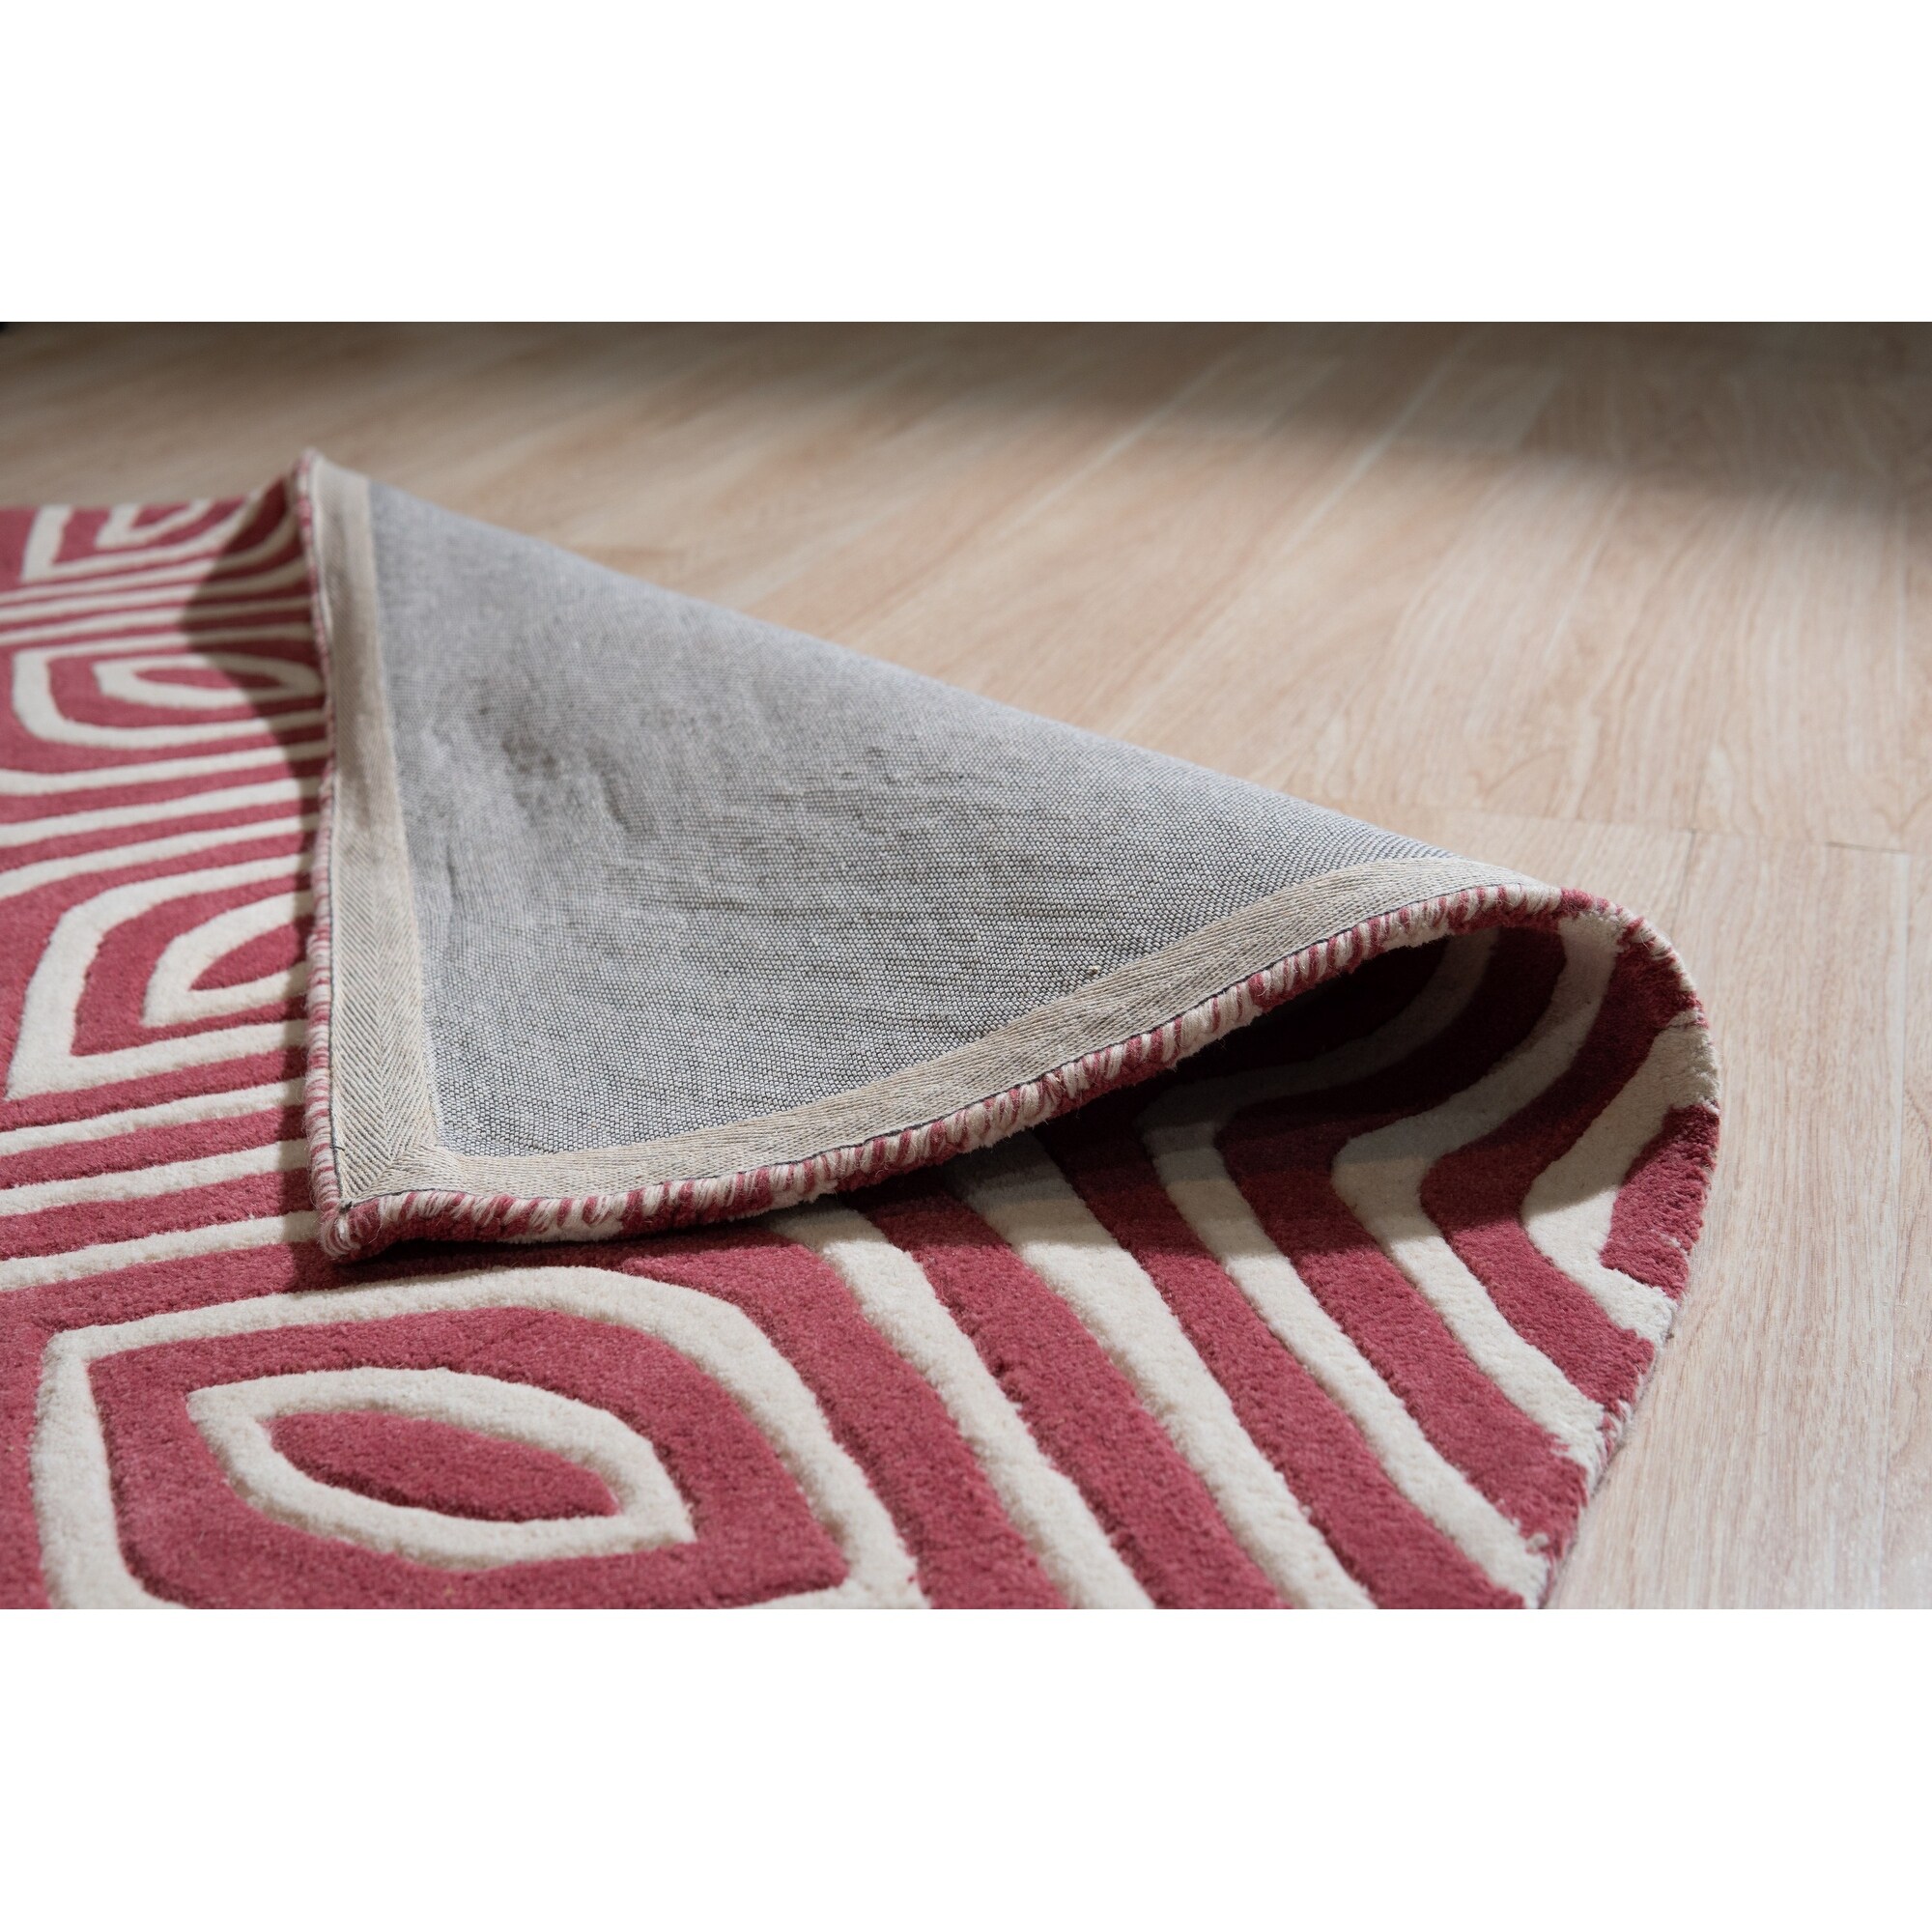 EORC Red Hand-Tufted Wool Contemporary Marla Rug, 5' x 8